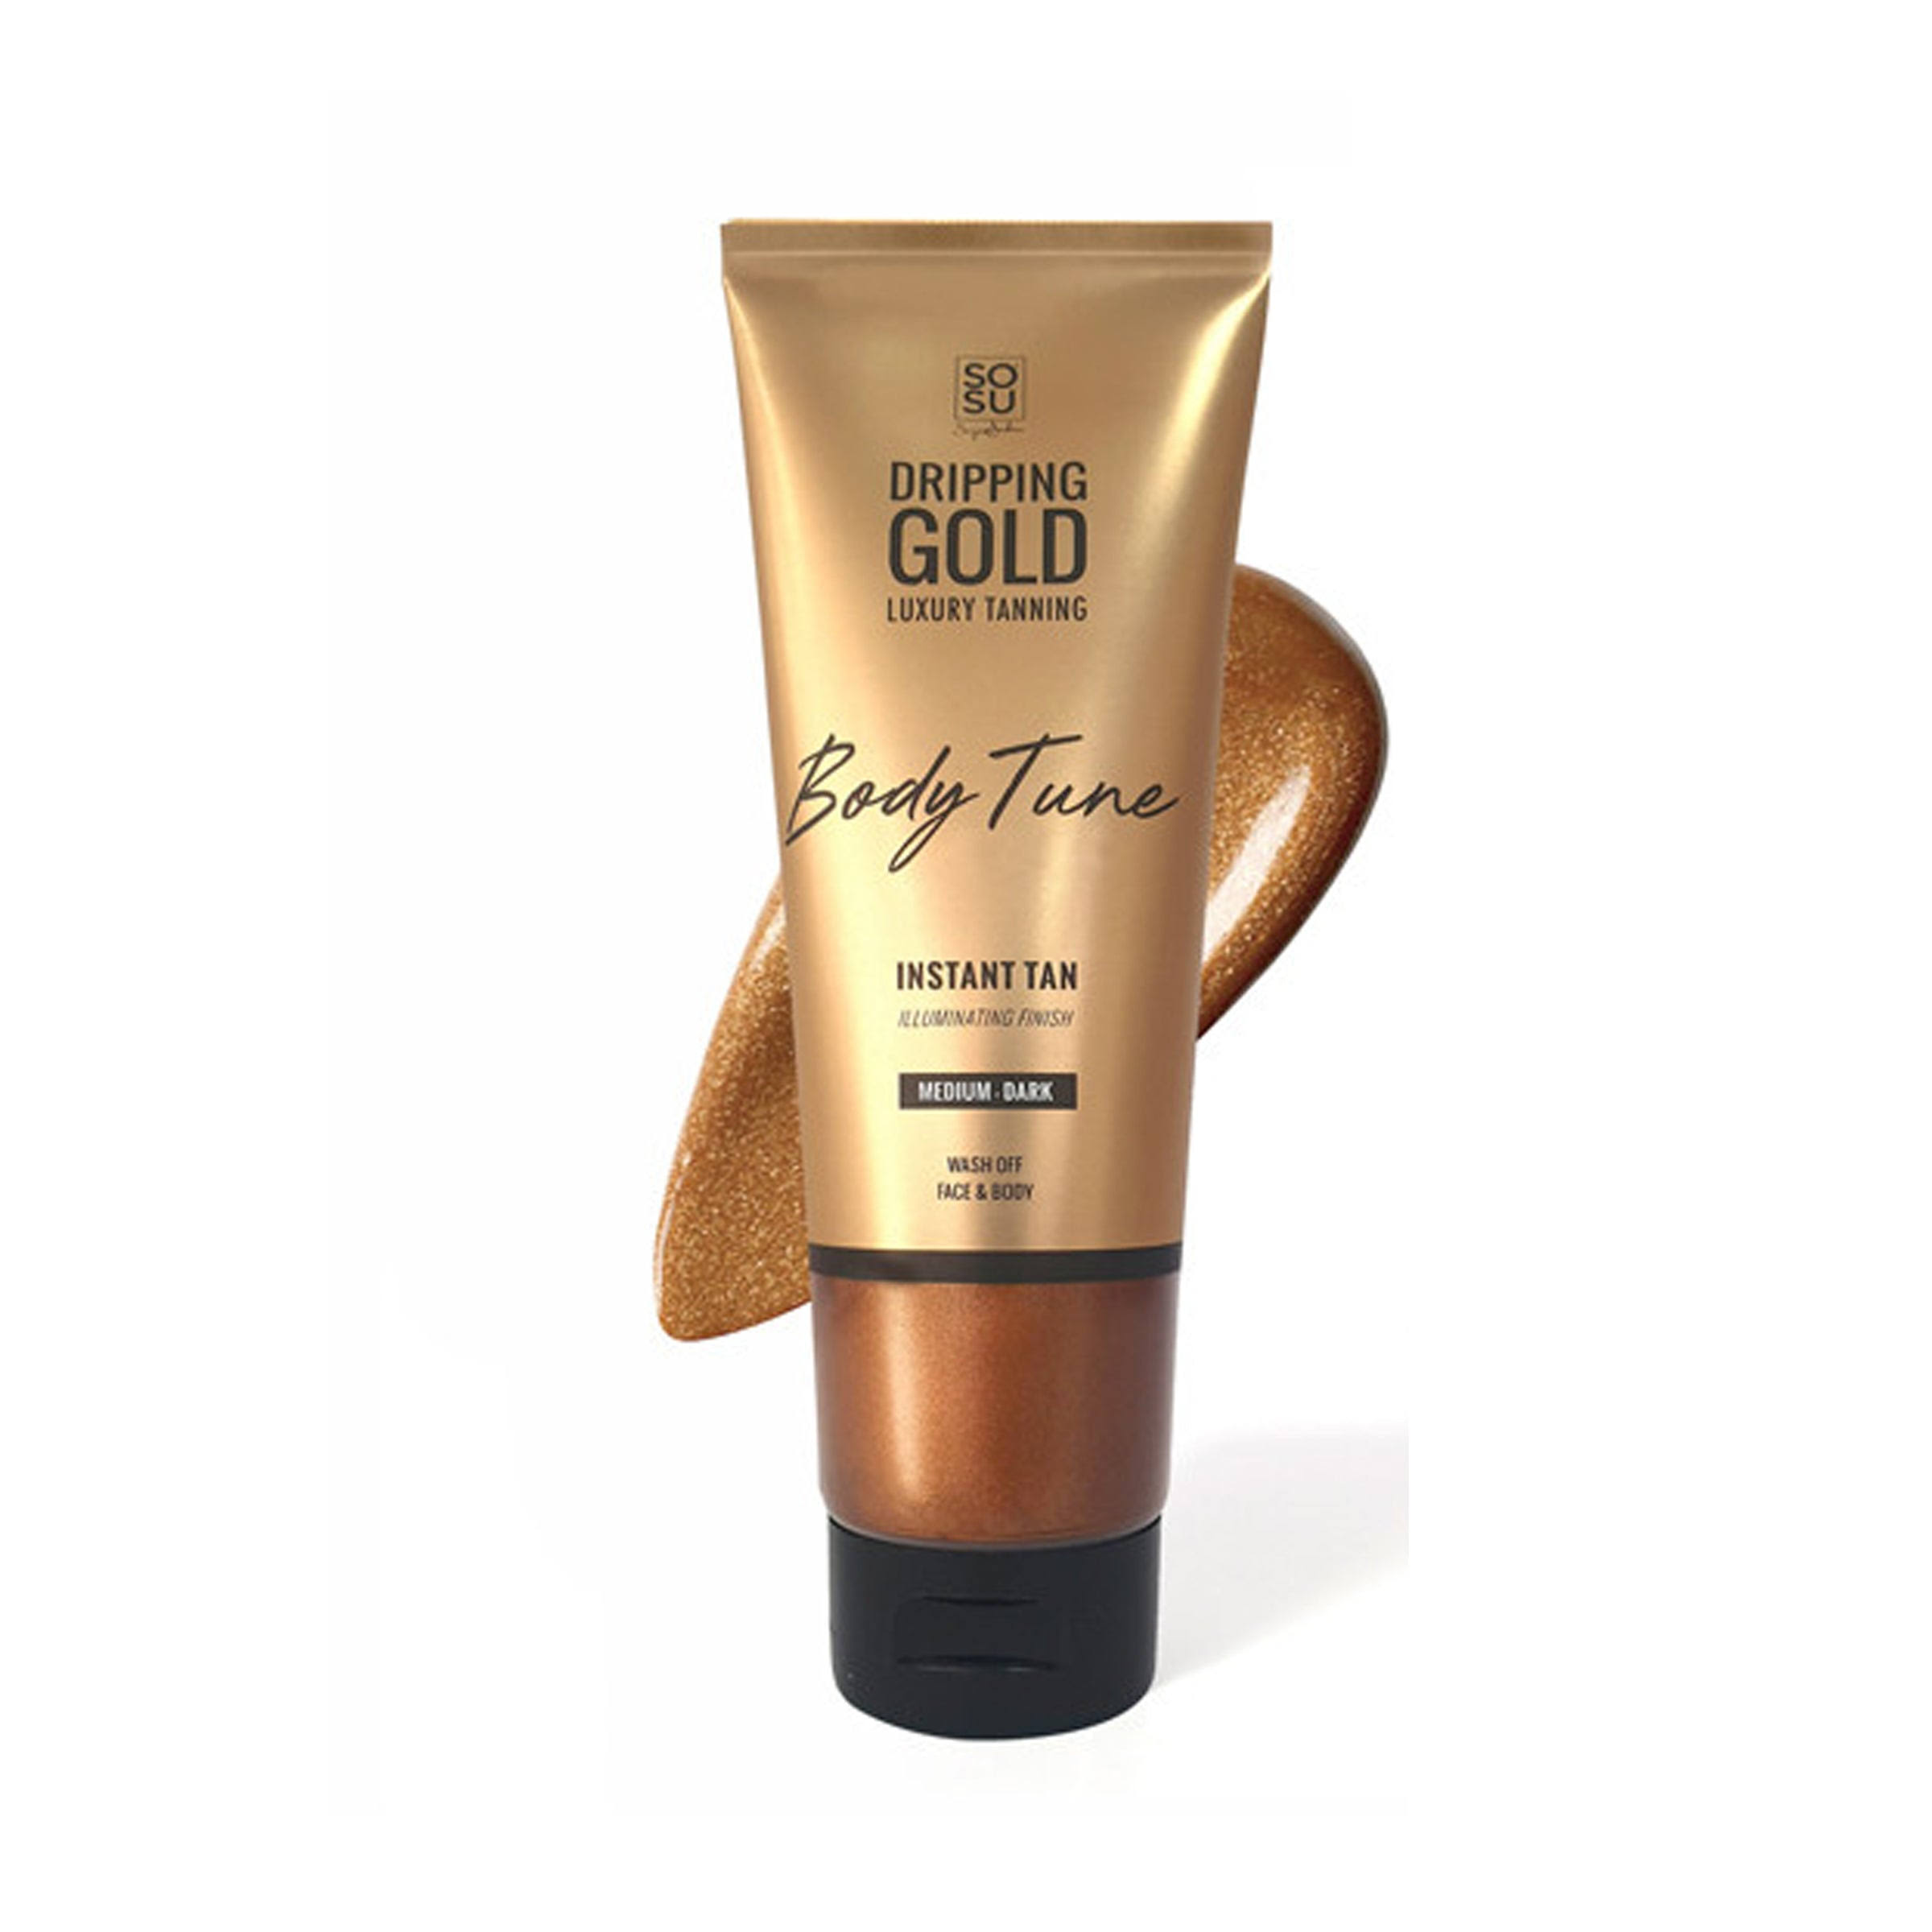 SOSU by Suzanne Jackson Dripping Gold Body Tune Instant Tan